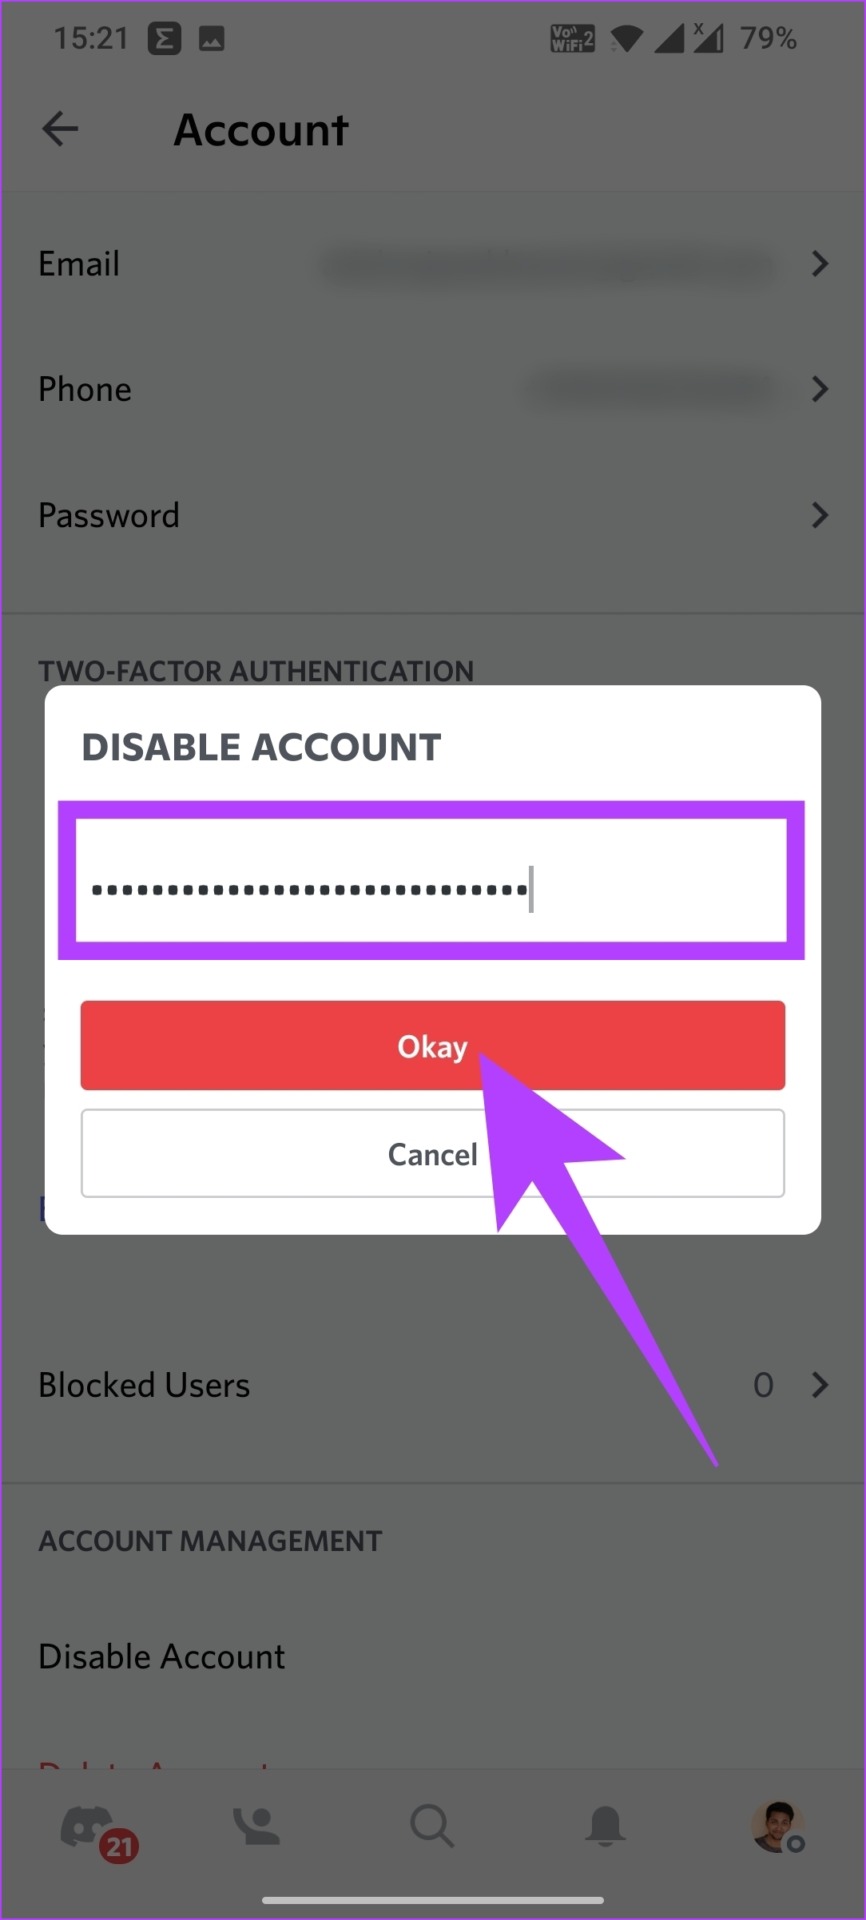 Disable Account prompt